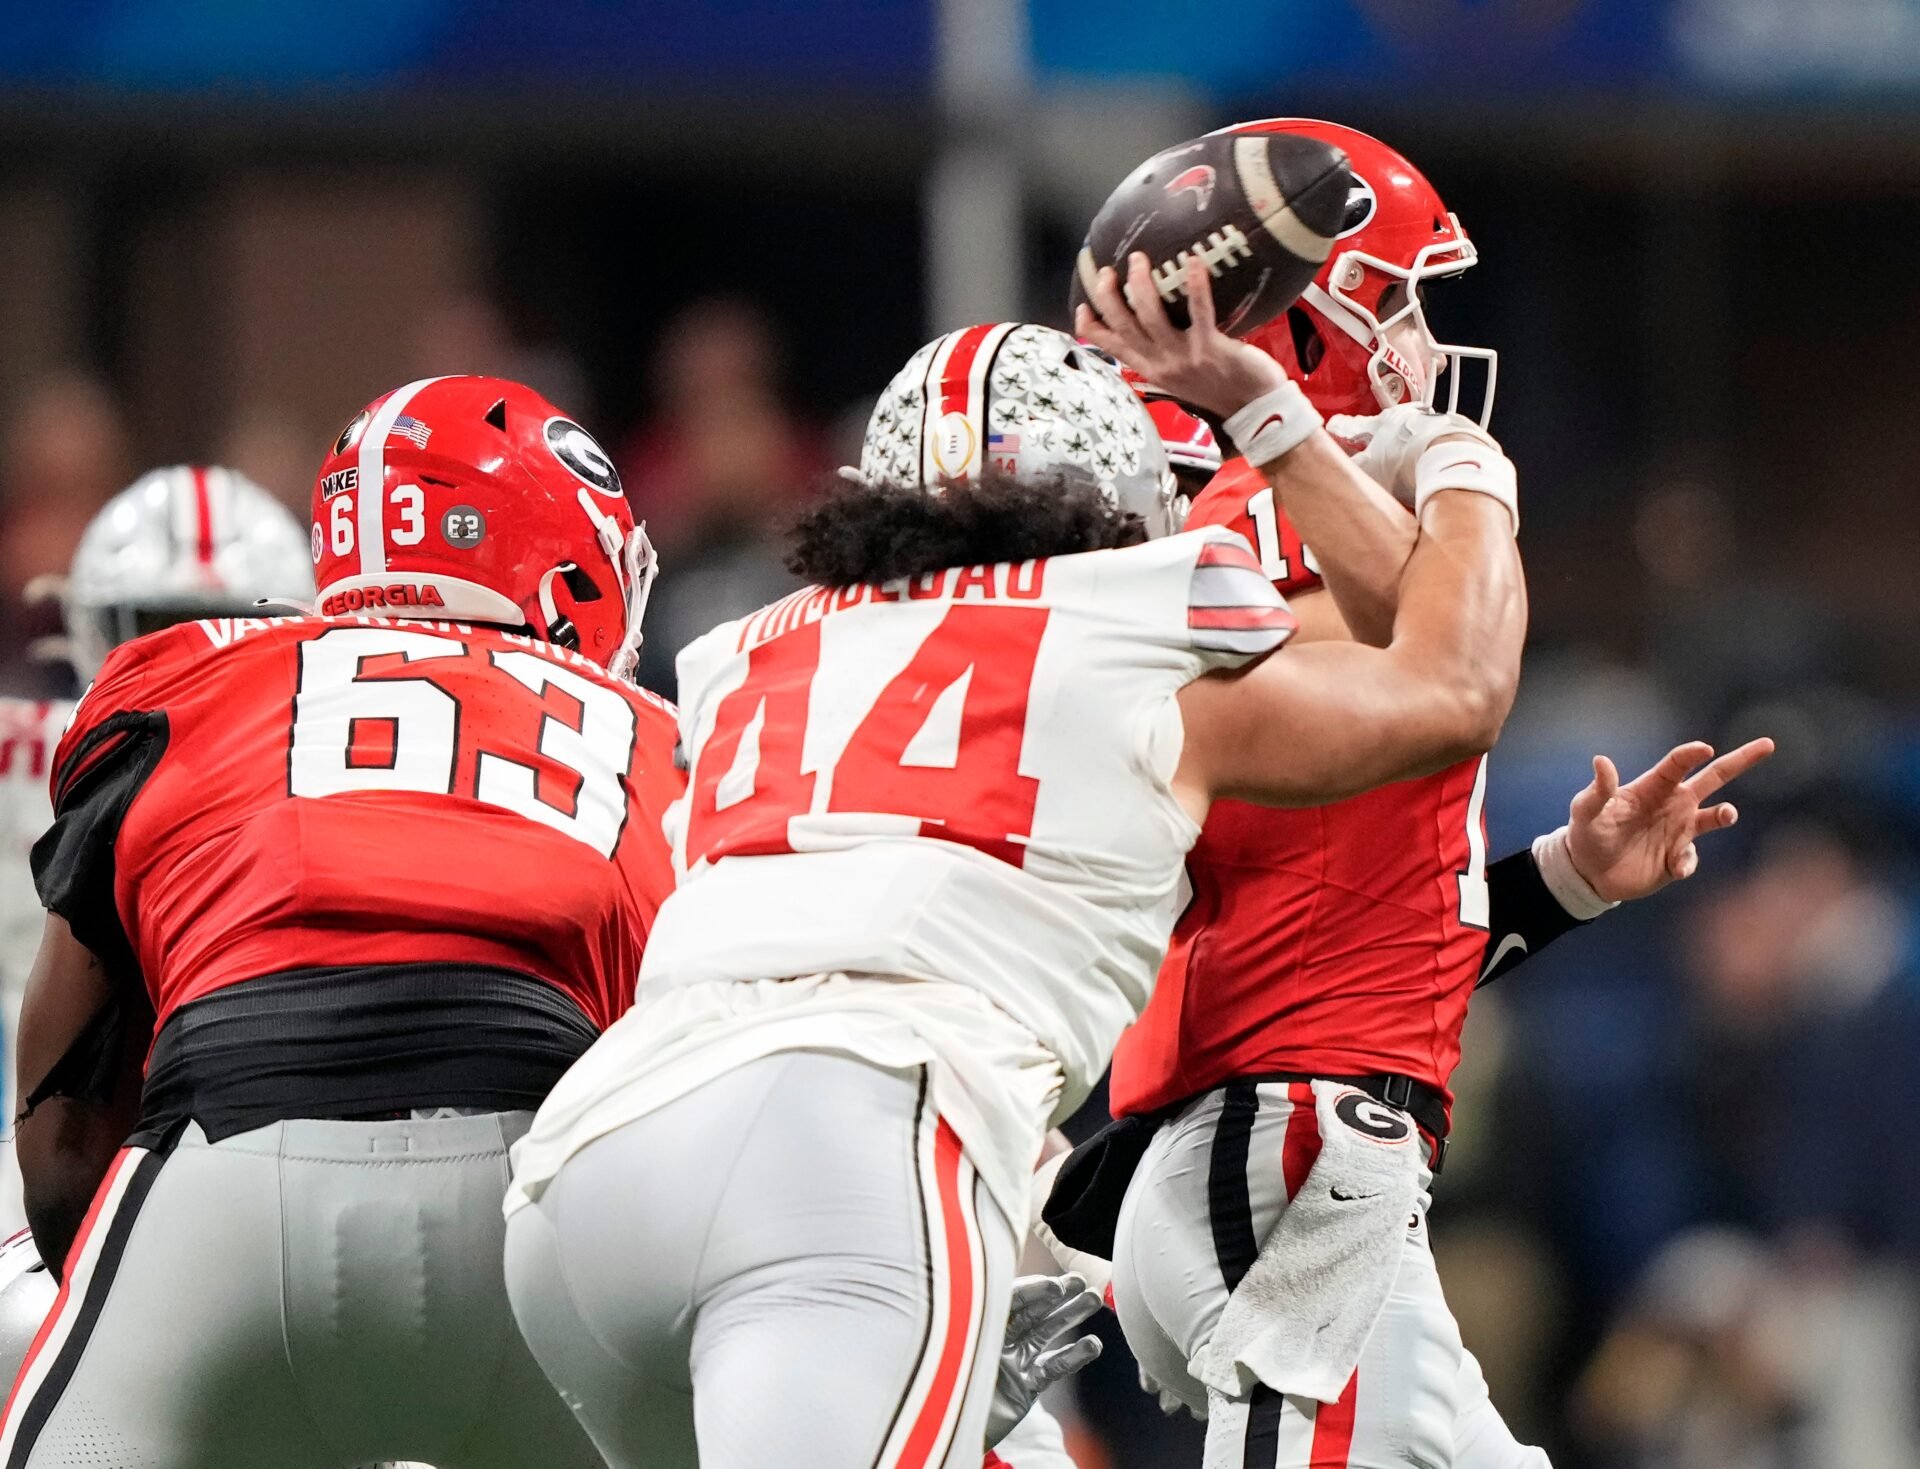 Ohio State Buckeyes defensive end J.T. Tuimoloau (44) hits the arm of Georgia Bulldogs quarterback Stetson Bennett (13) as the throws the ball in the third quarter during the Peach Bowl in the College Football Playoff semifinal at Mercedes-Benz Stadium.